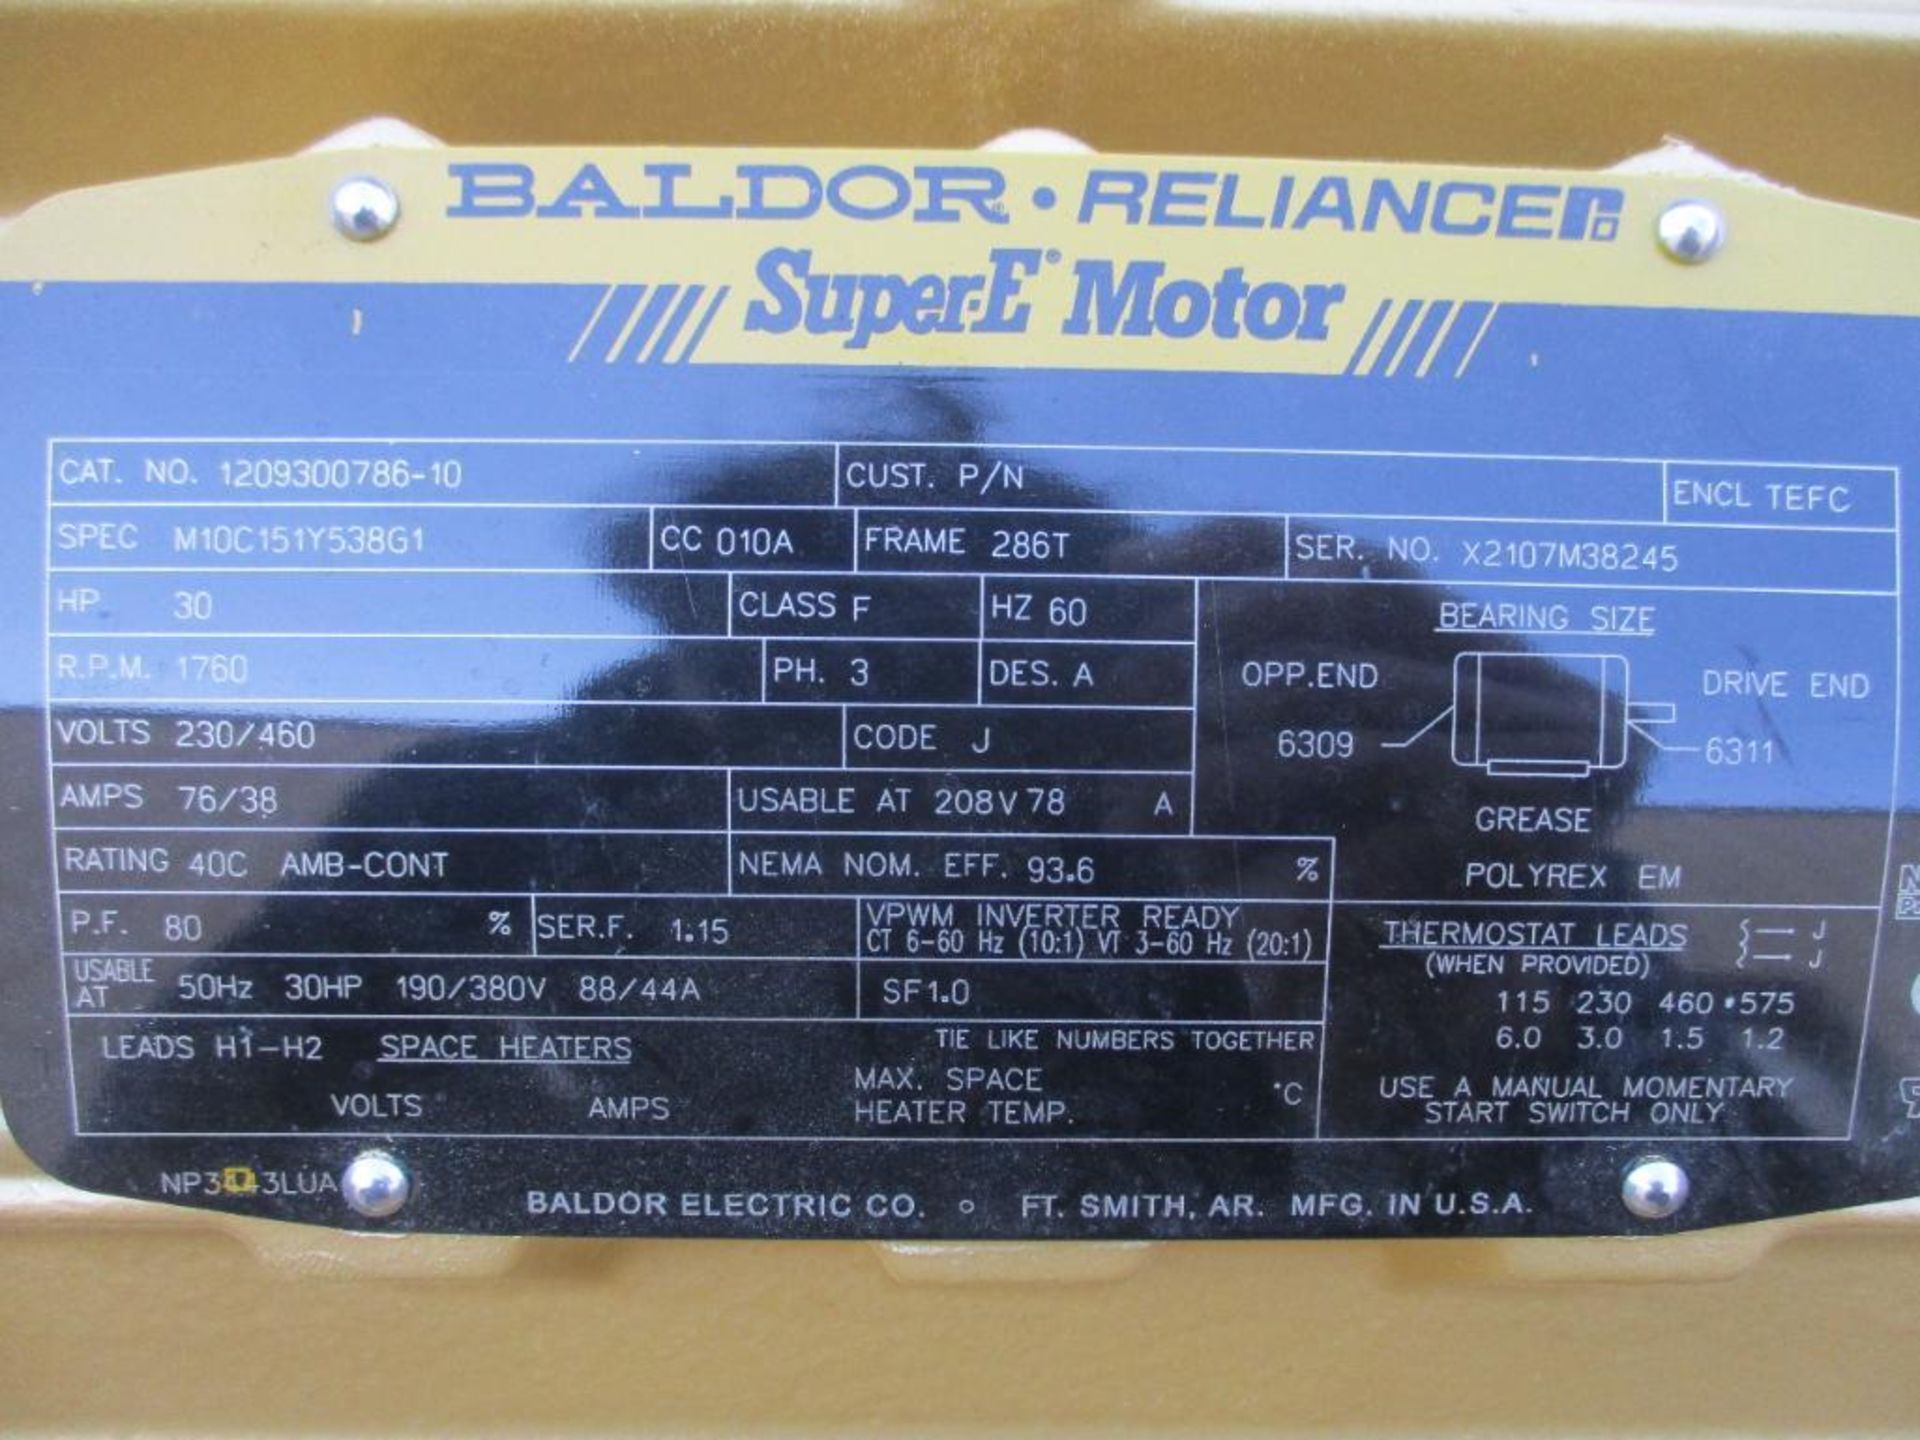 BALDOR 3 PHASE 30HP 1760RPM 286T FRAME A/C MOTOR P/N 1209300786-10 463# LBS (THIS LOT IS FOB KNOXVIL - Image 2 of 4